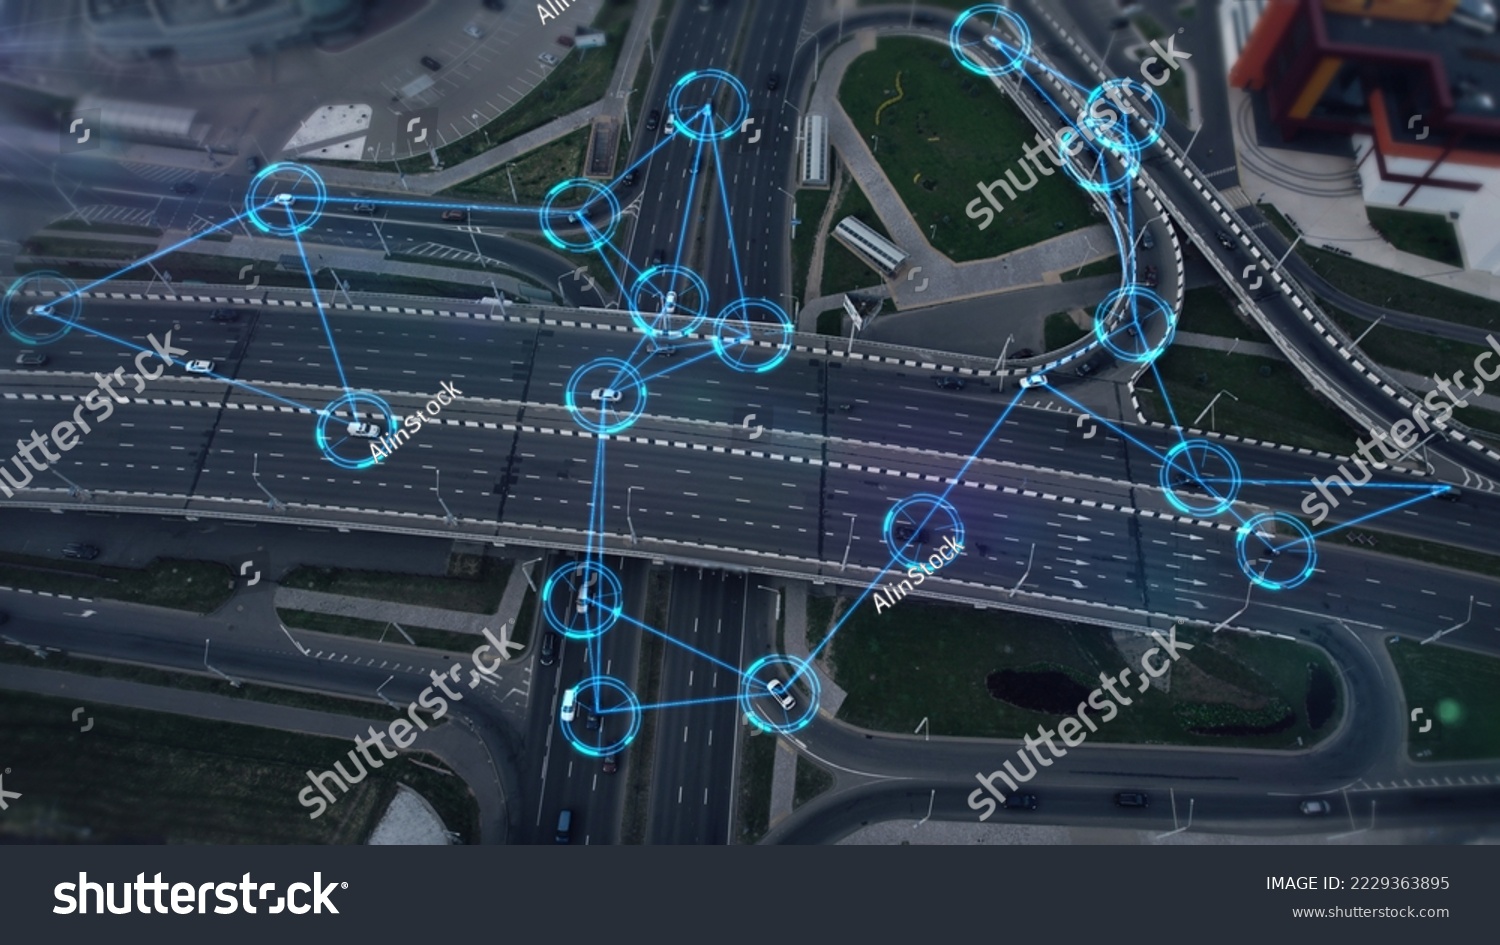 Concept of smart cars and transportation of the future. Automated robotic system remotely controls self-driving cars in the city. Artificial Intelligence Digitalizes and Analyzes Roads. Aerial view. #2229363895